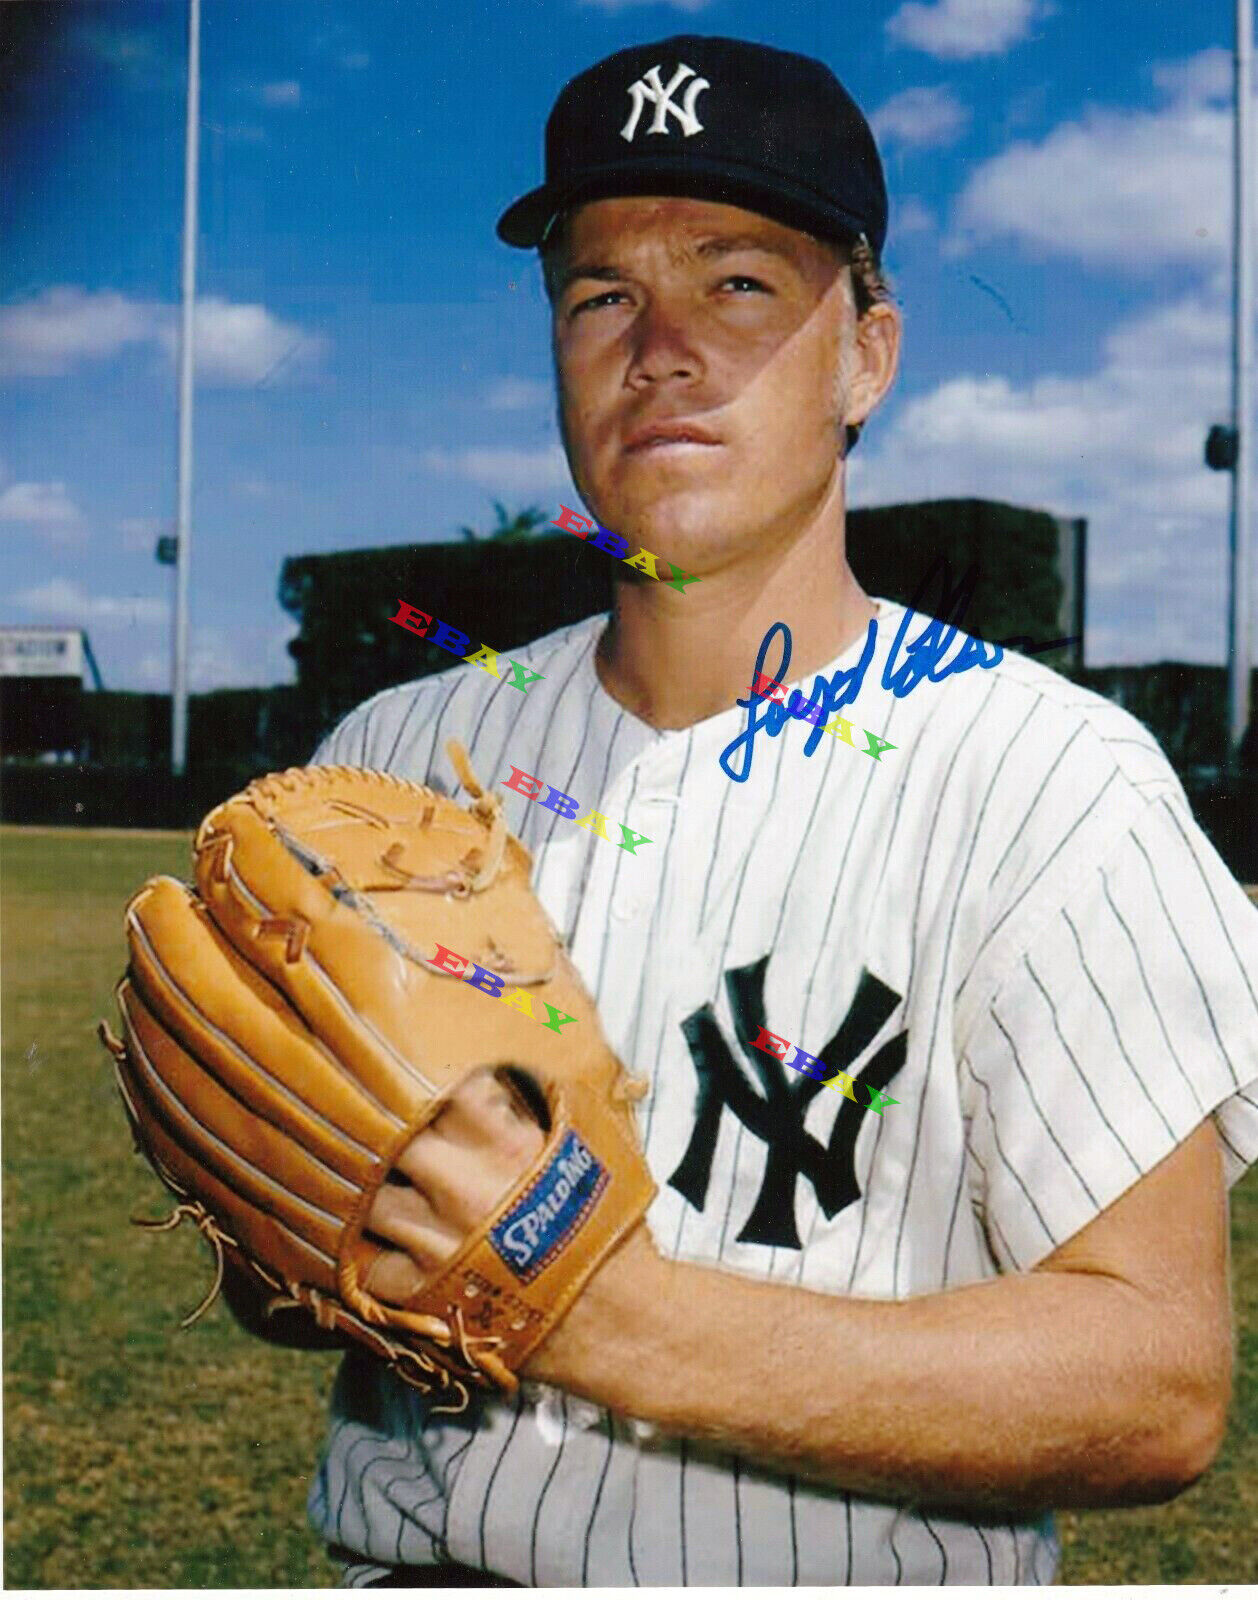 LOYD COLSON NEW YORK YANKEES 1970 Signed Autographed 8x10 Photo Poster painting Reprint